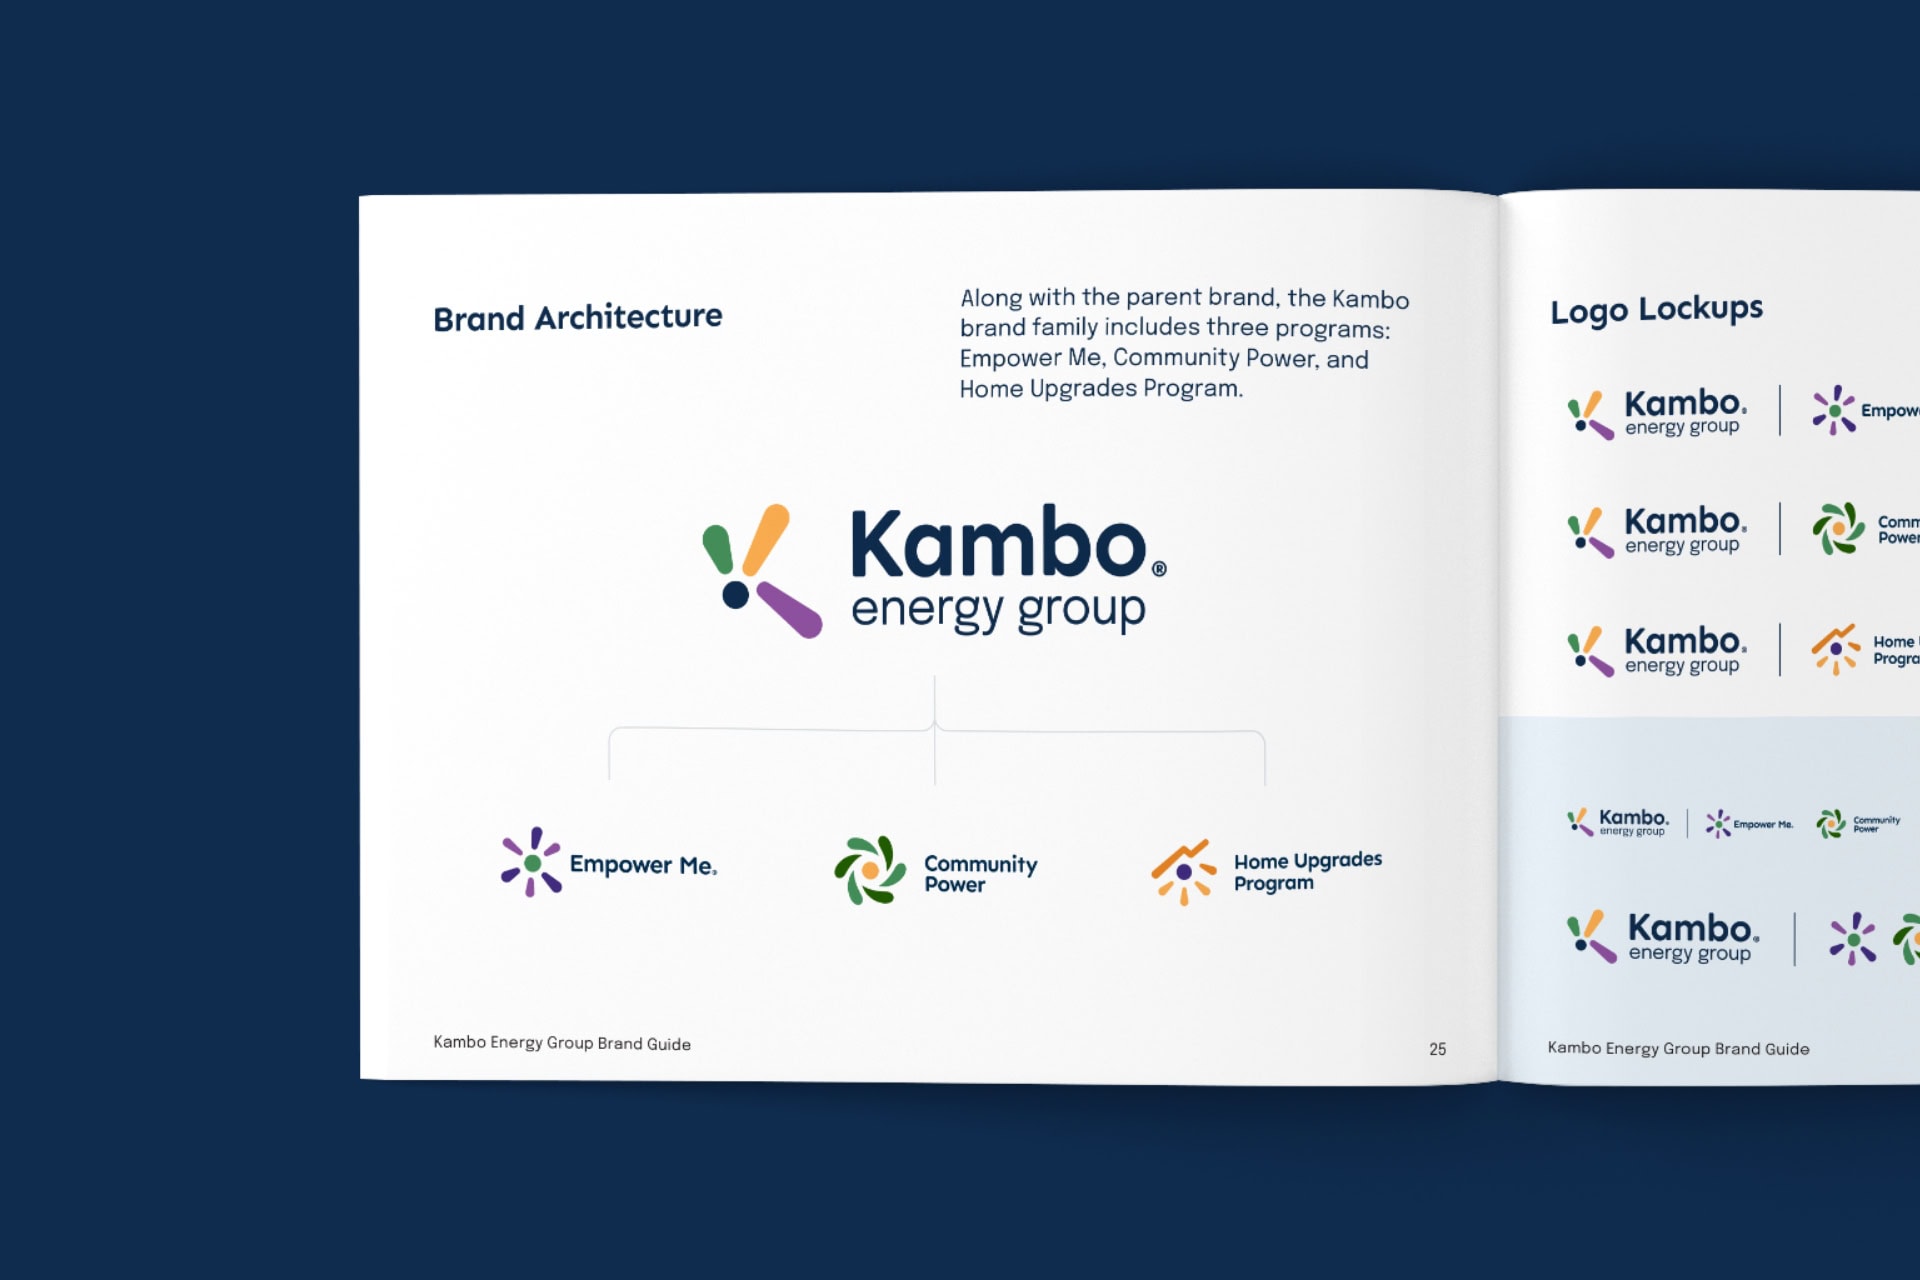 The Kambo energy group brand guide is open to the first page. At the top of the page is a title in their brand colours indicating the topic is about 'Brand Architecture'.